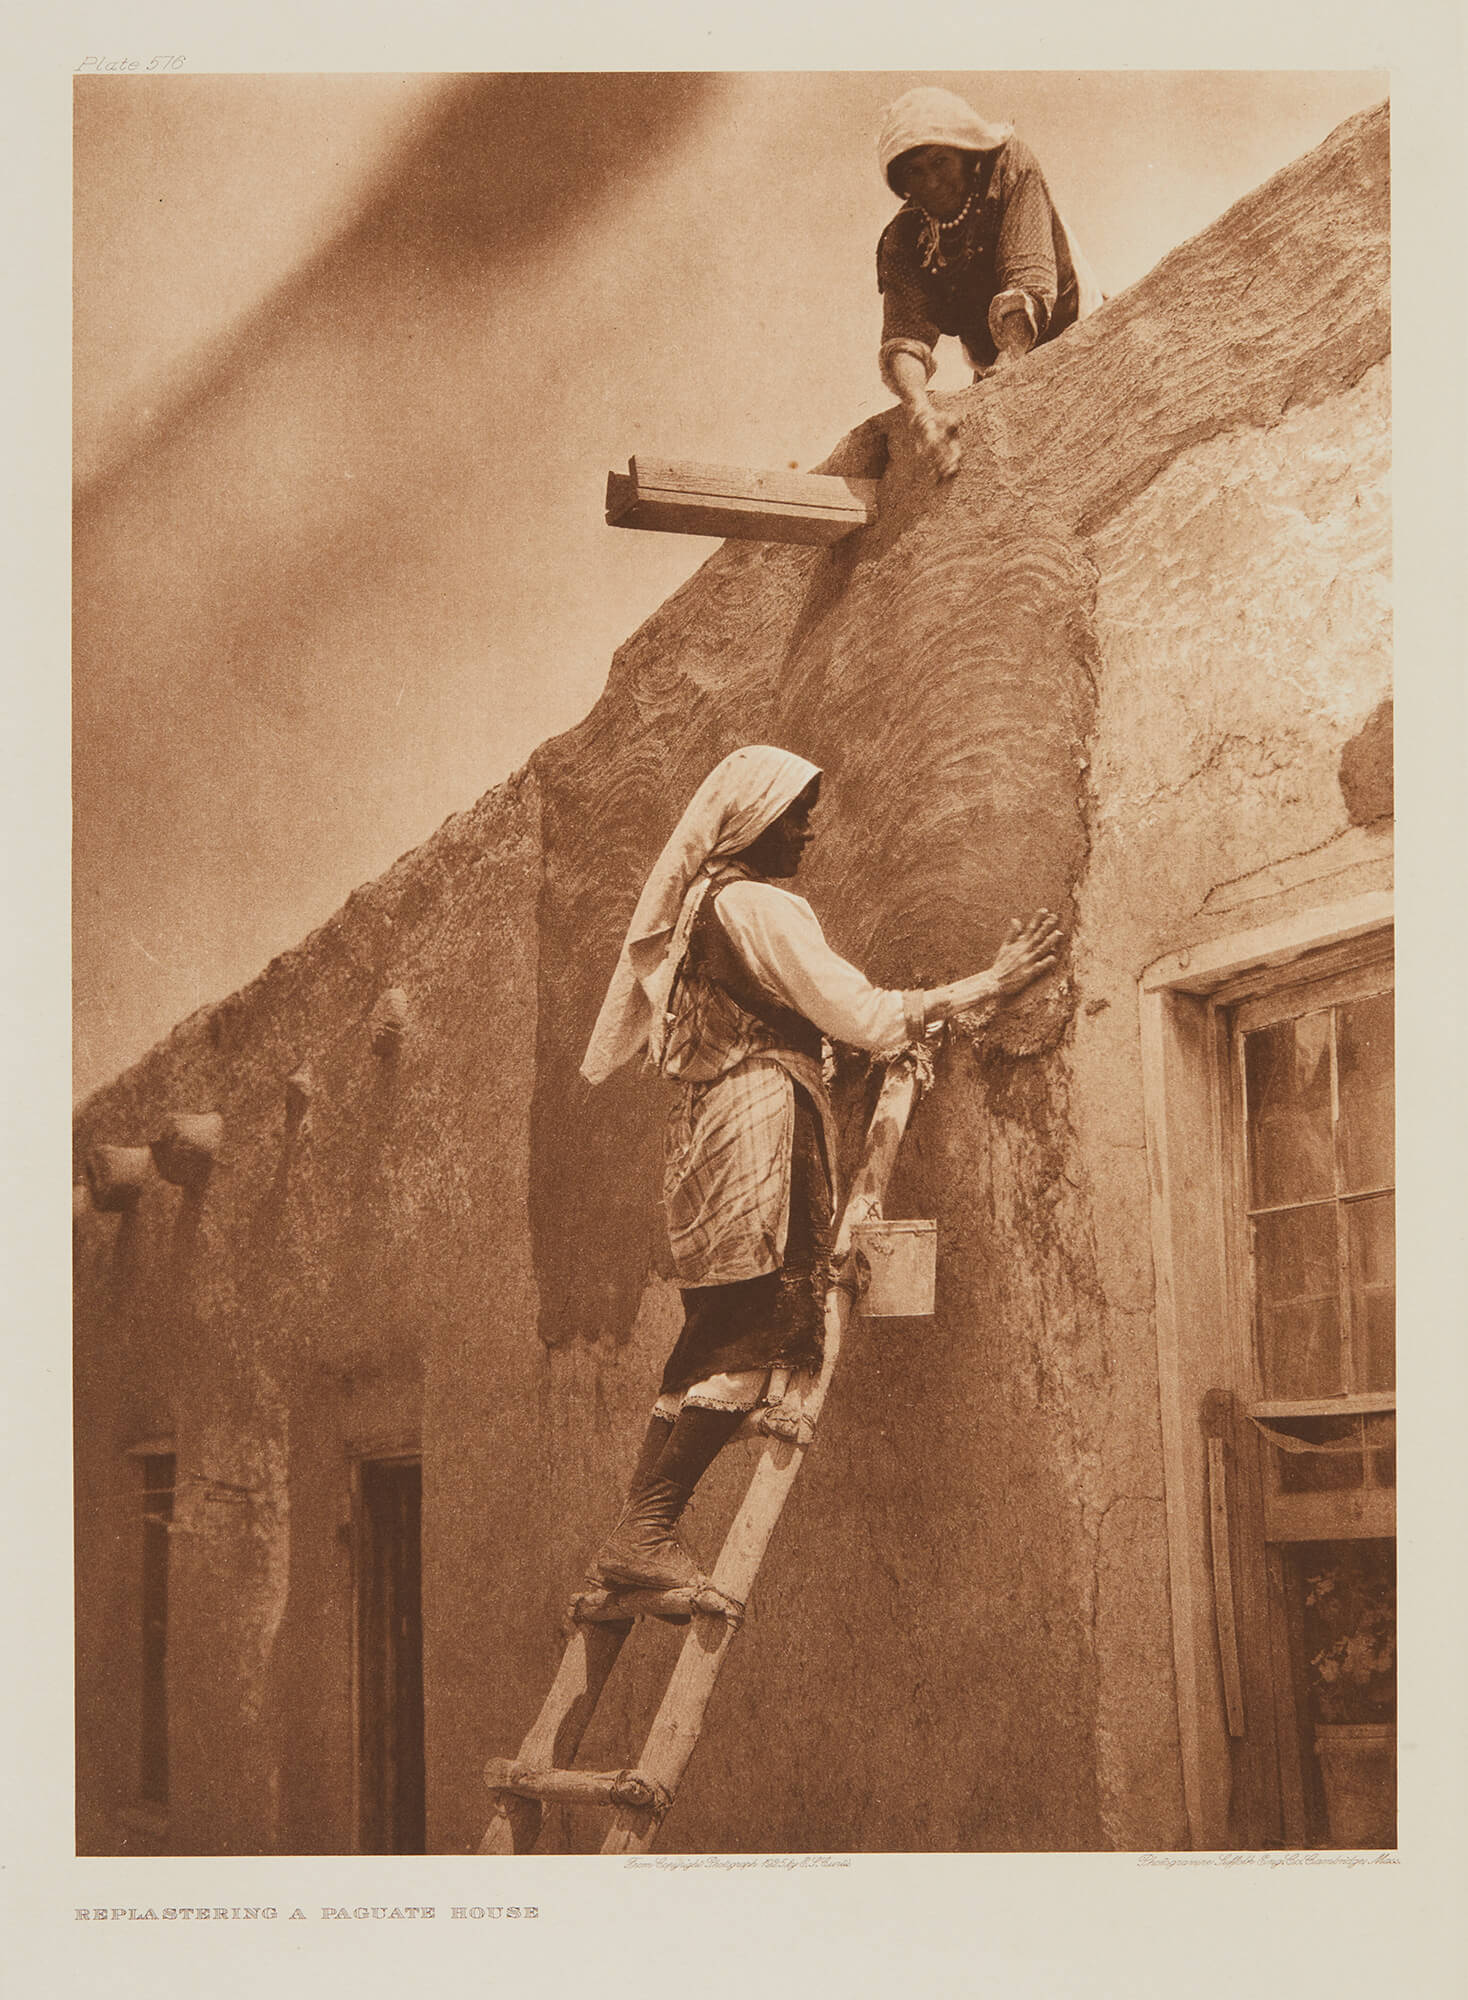 Edward S. Curtis - Replastering Paguate House - The North American Indian